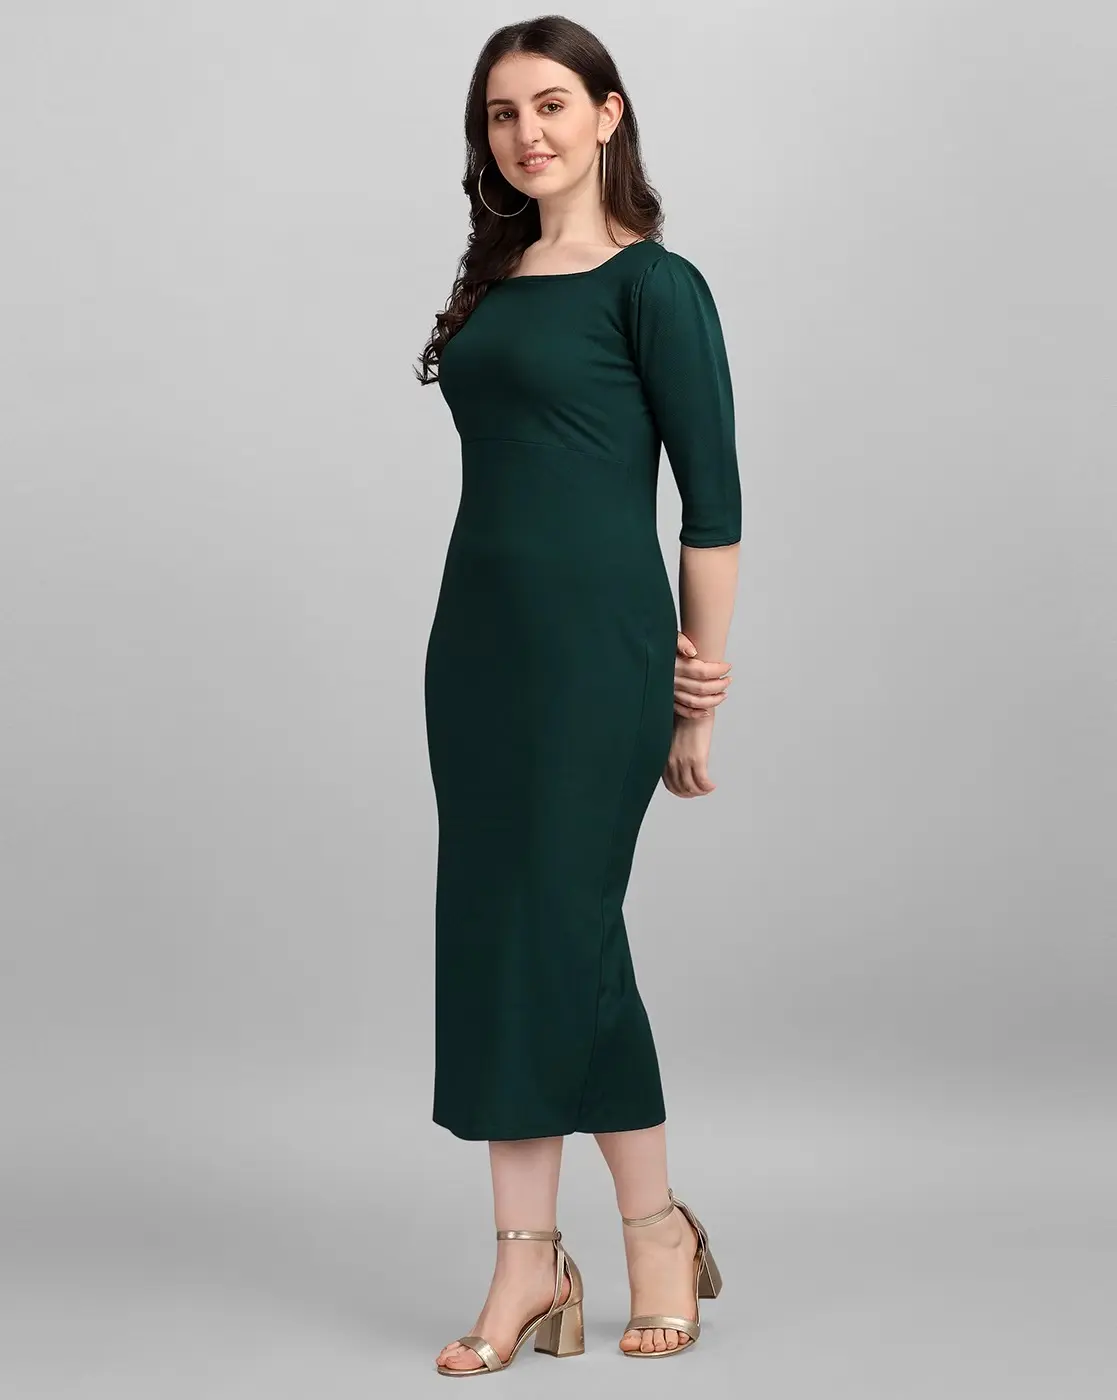 10 Green Dresses To Fashionably Hop On The Trend Train